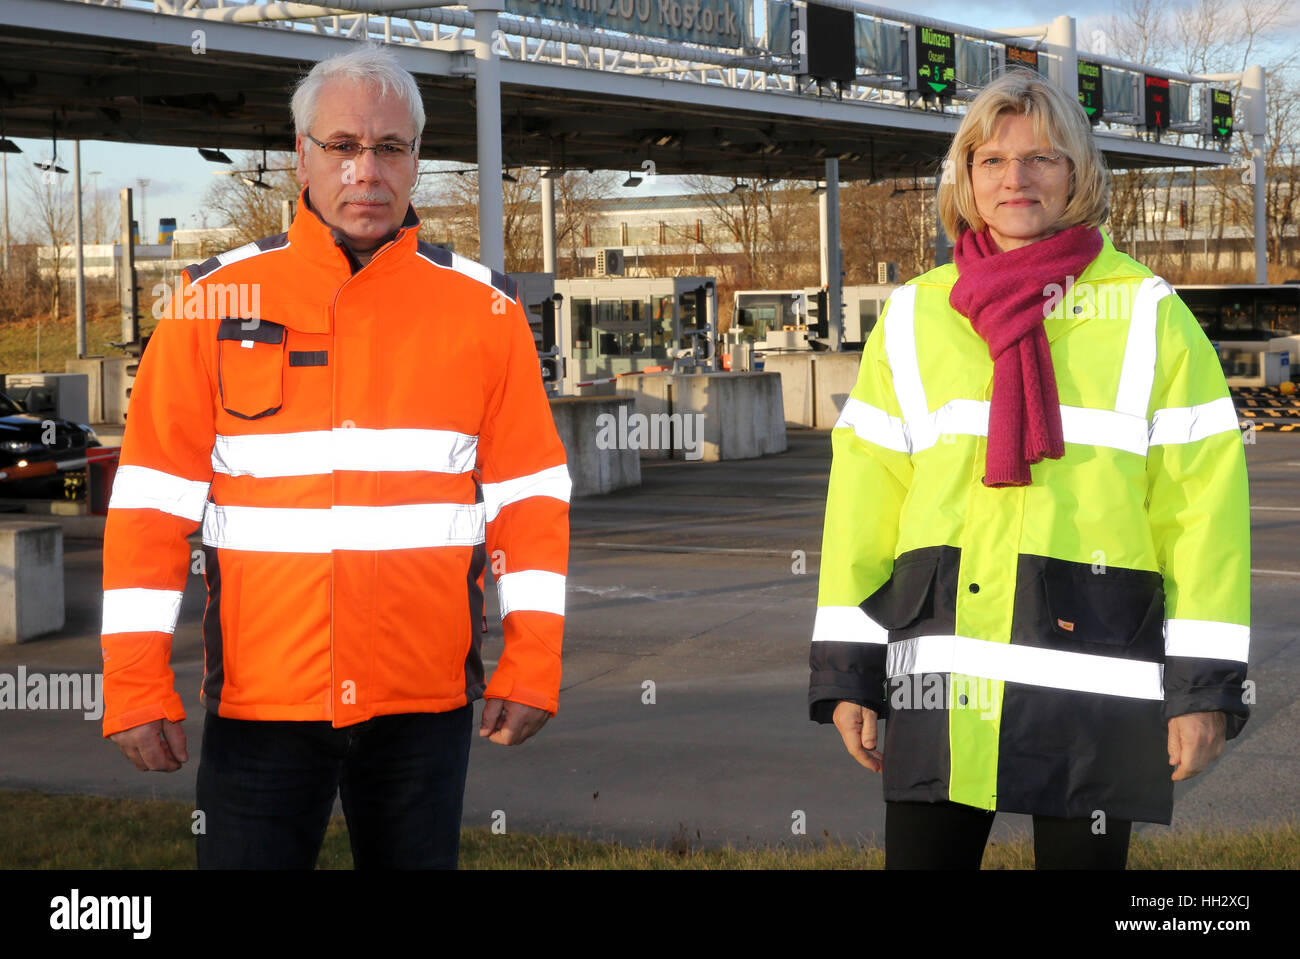 Rostock, Germany. 5th Jan, 2017. Yvonne Osterkamp (r) and Olaf Wiechmann, CEOs of the Warnowquerung GmbH & Co. KG, stand in front of the road charge station at the Warnow tunnel in Rostock, Germany, 5 January 2017. The 220-million-Euro tunnel opened in 2003 as Germany's first privately financed infrastructure project. Photo: Bernd Wüstneck/dpa-Zentralbild/dpa/Alamy Live News Stock Photo